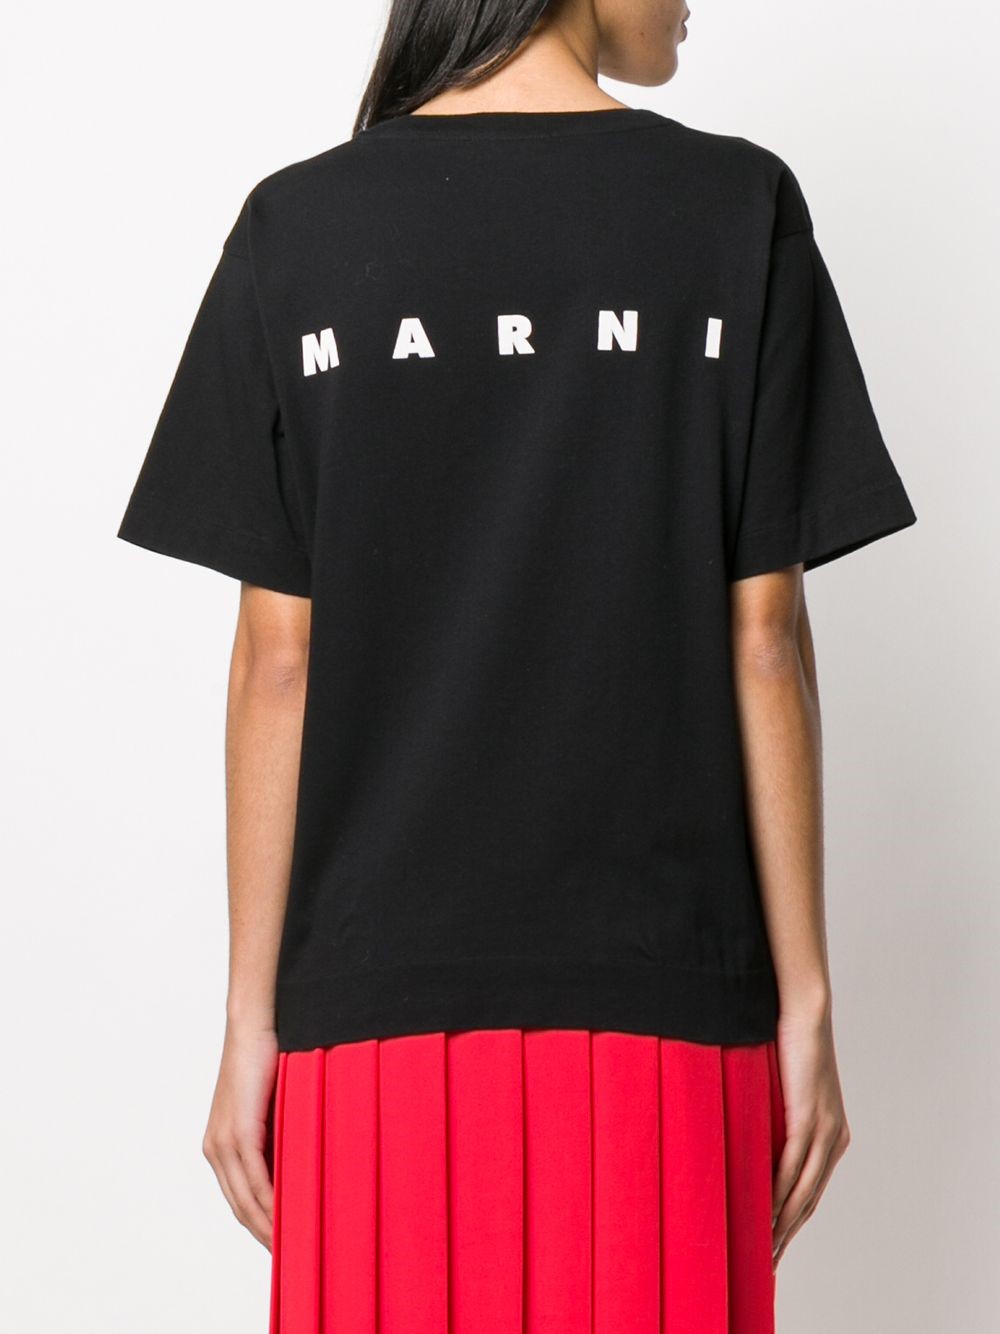 marni T-SHIRT available on montiboutique.com - 32207